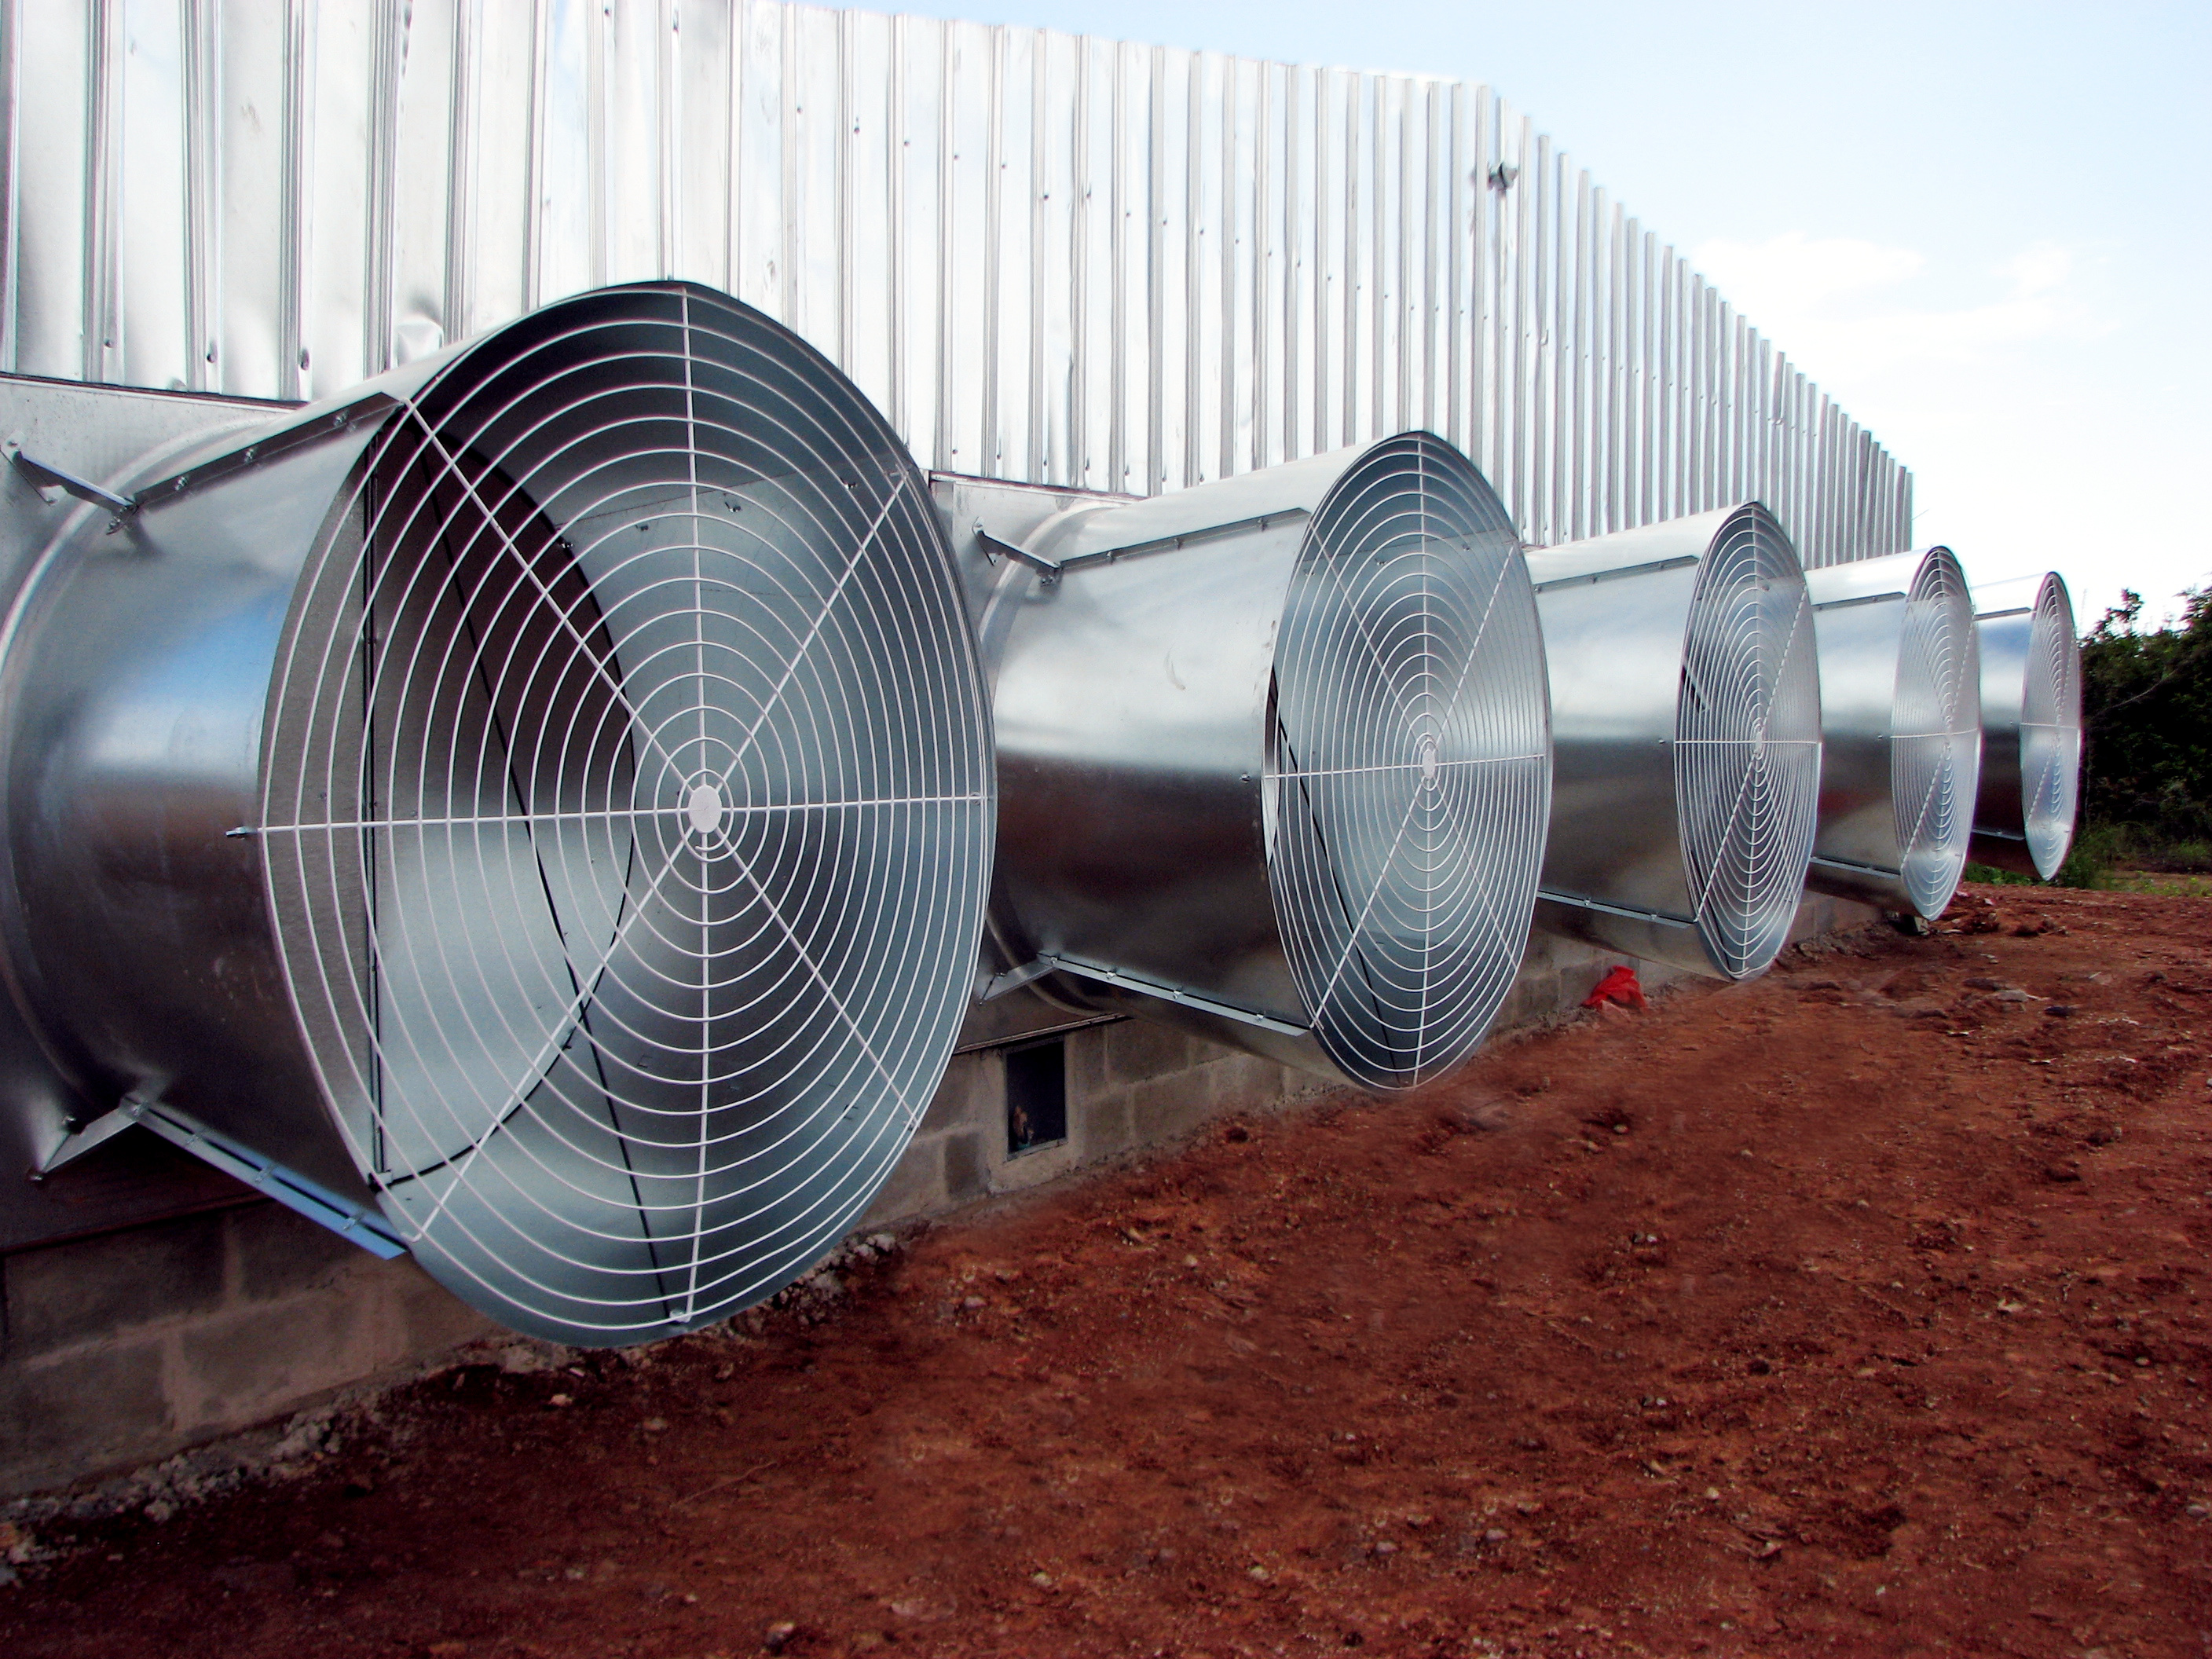 Commercial poultry houses are designed to have good ventilation to prevent ammonia build up